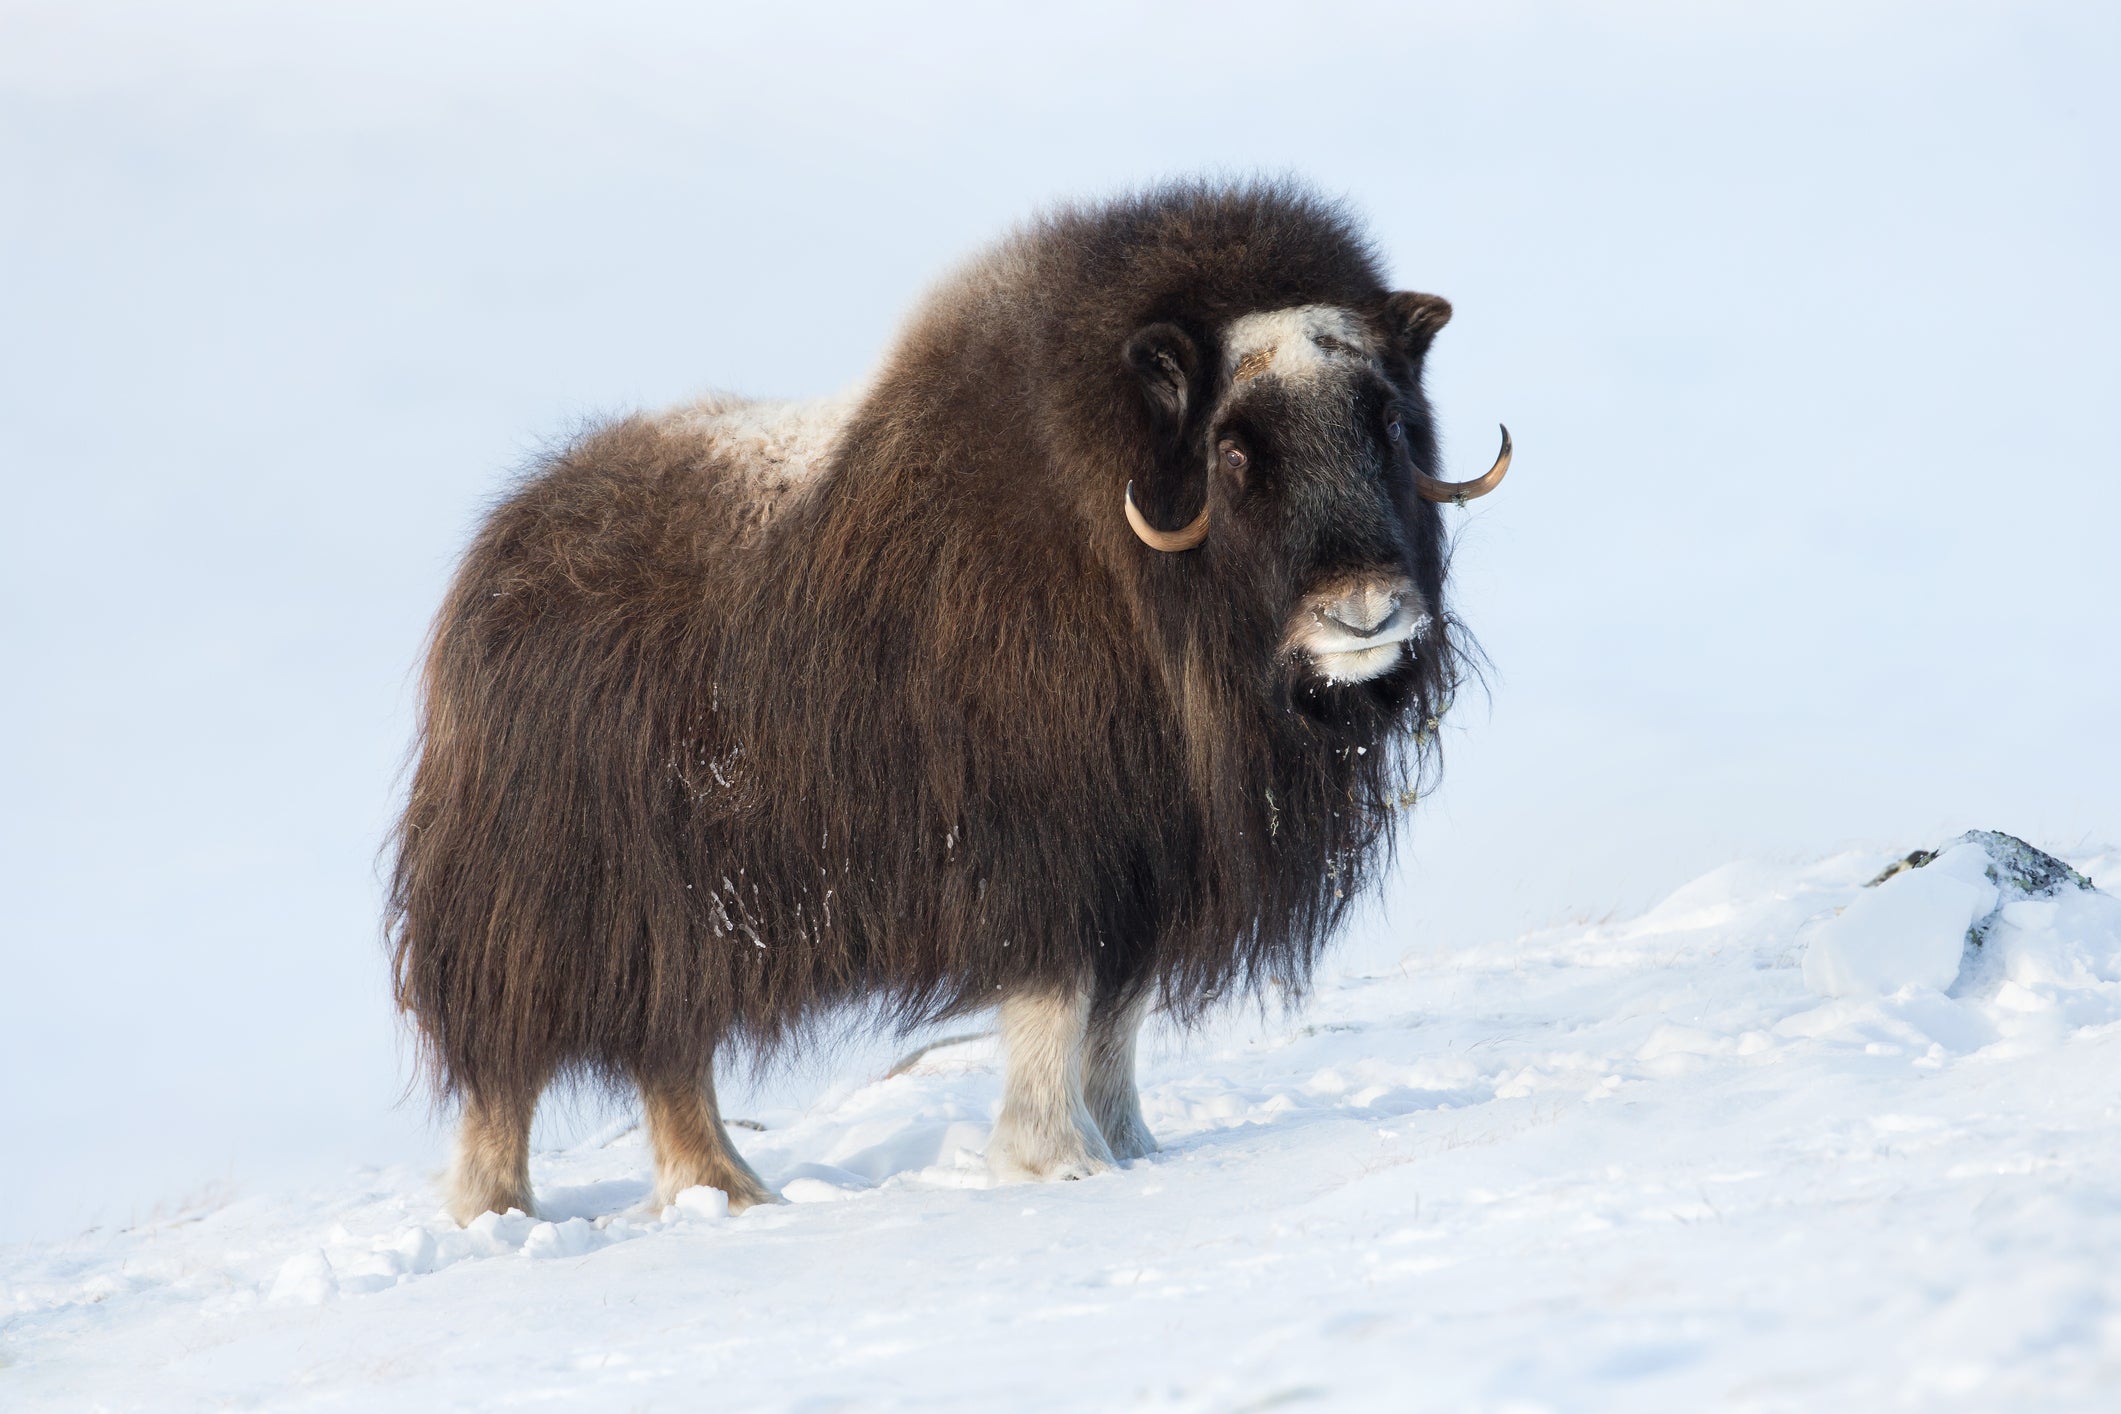 Musk Oxen like to feast at certain times during the year